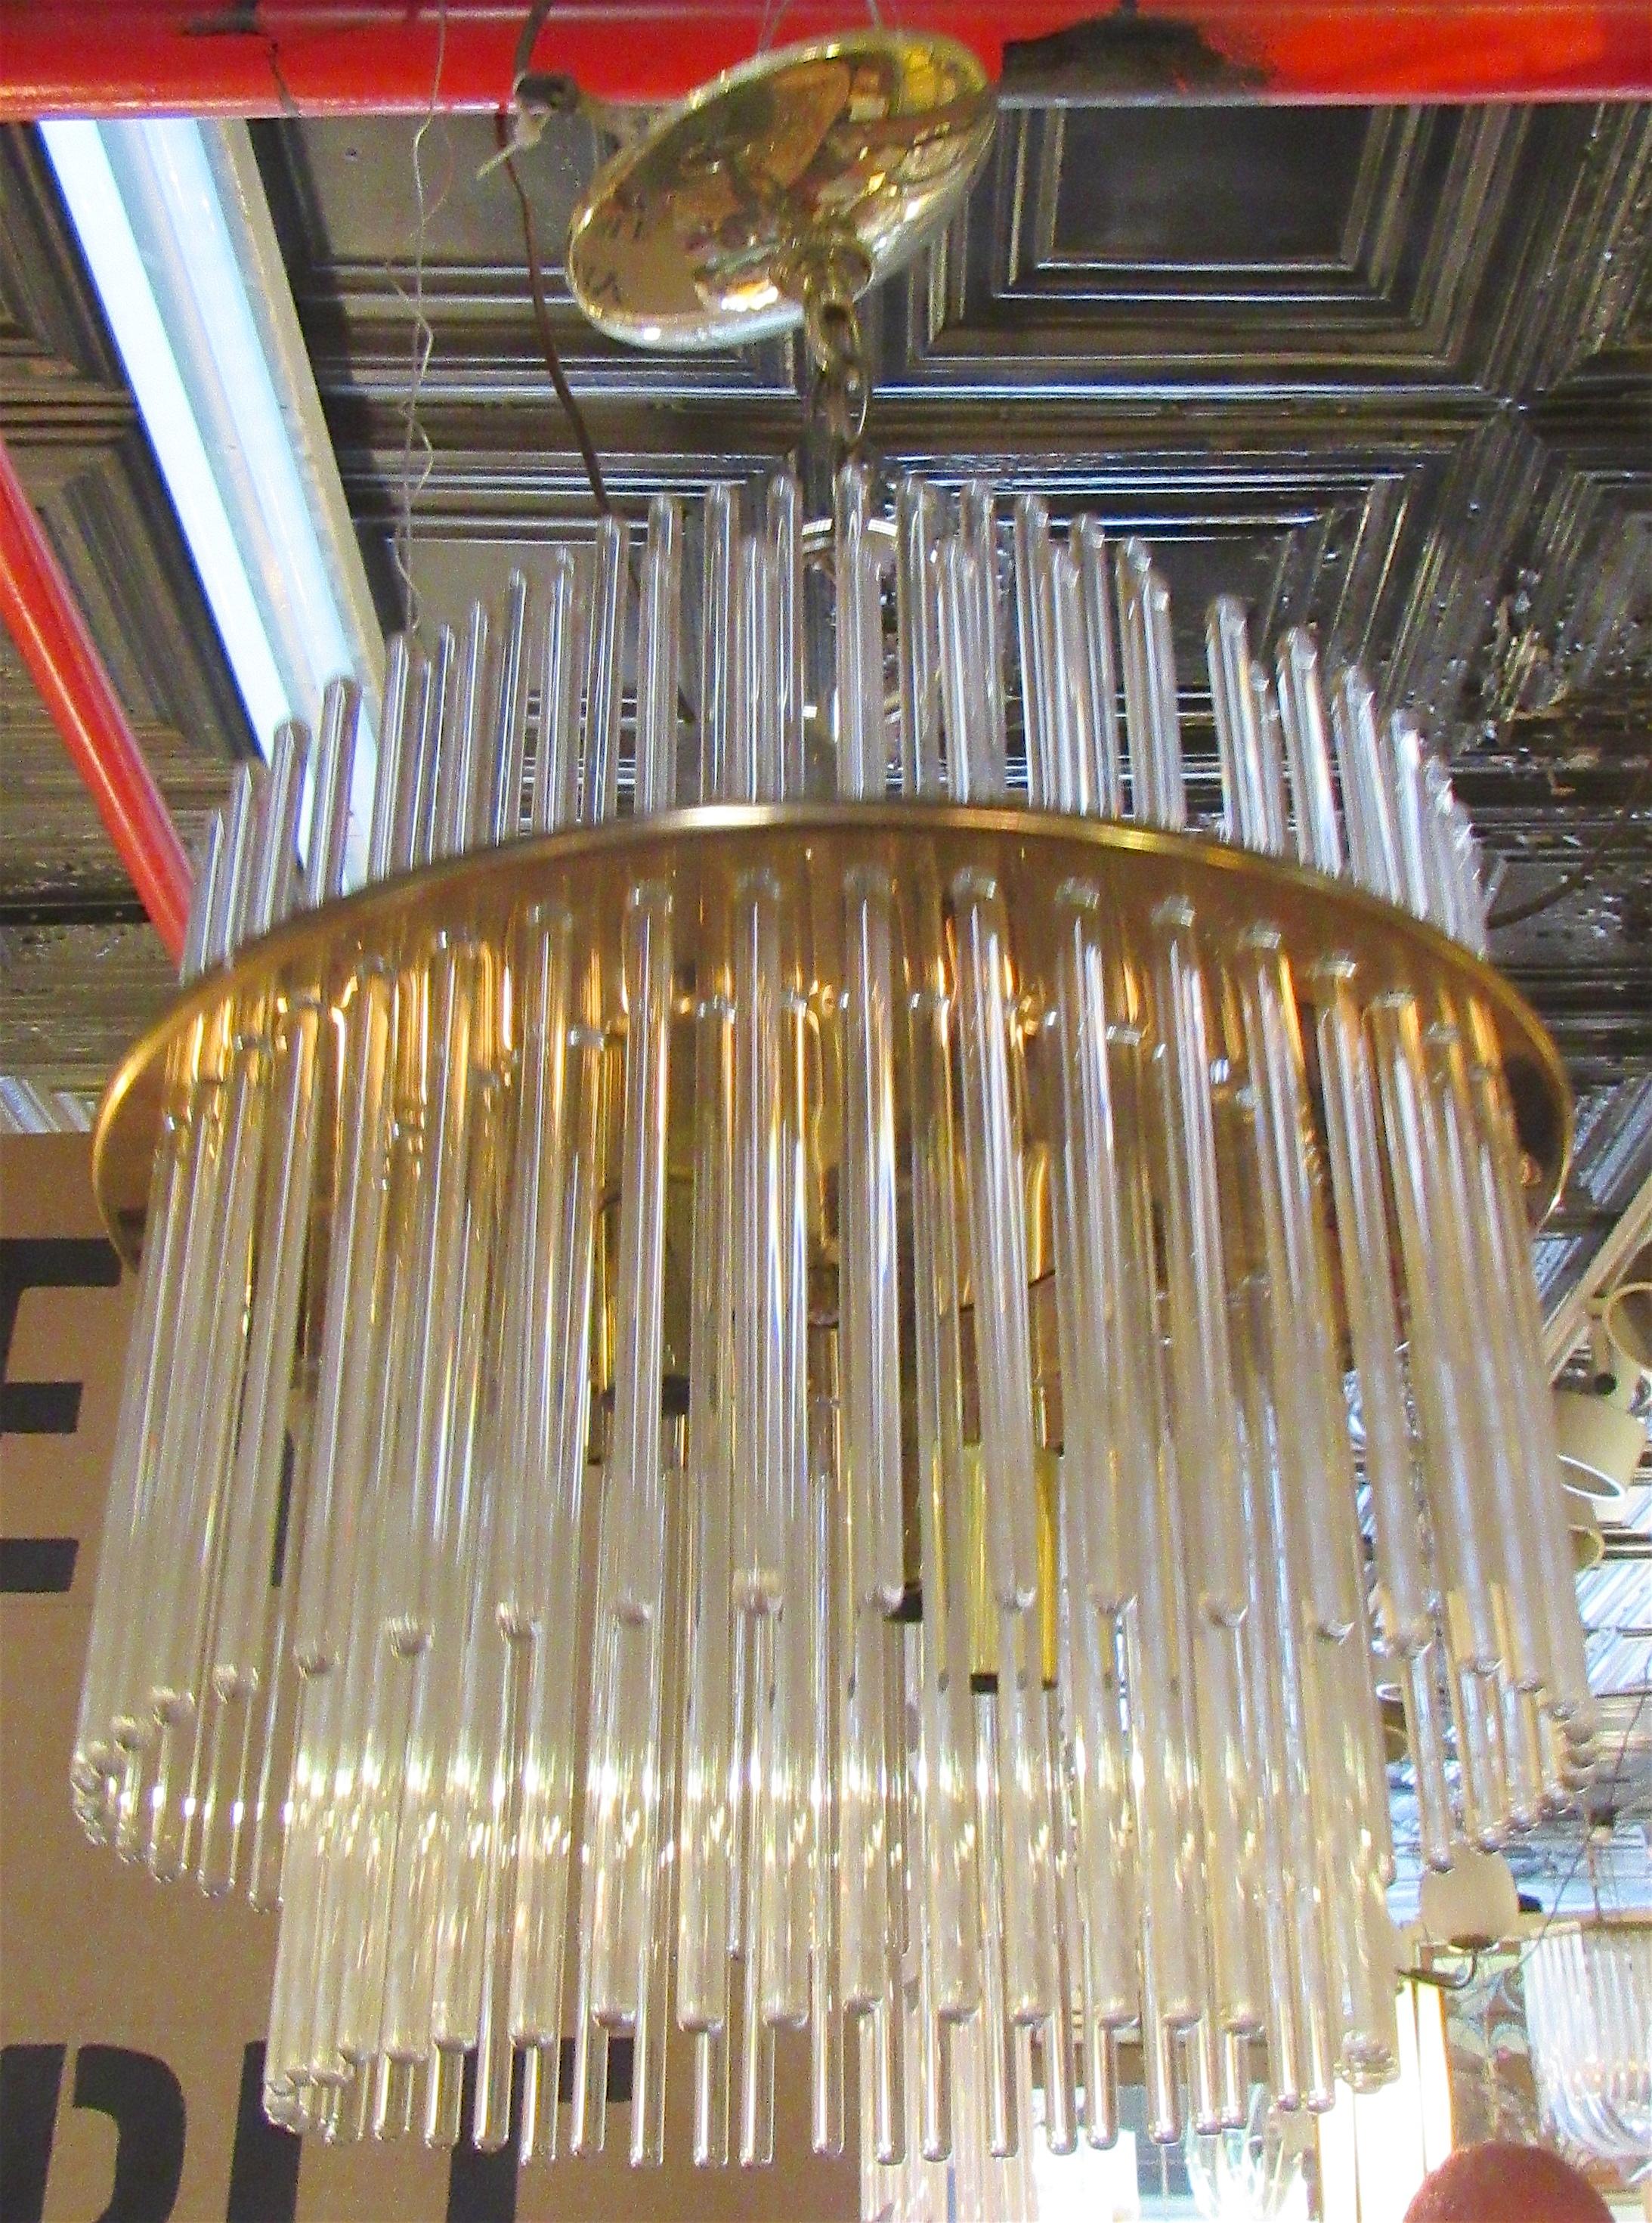 Mid-century modern chandelier by Sciolari Lighting featuring long glass rods set inside a polished brass ring. Two up light, three down light sockets.
Please confirm location NY or NJ